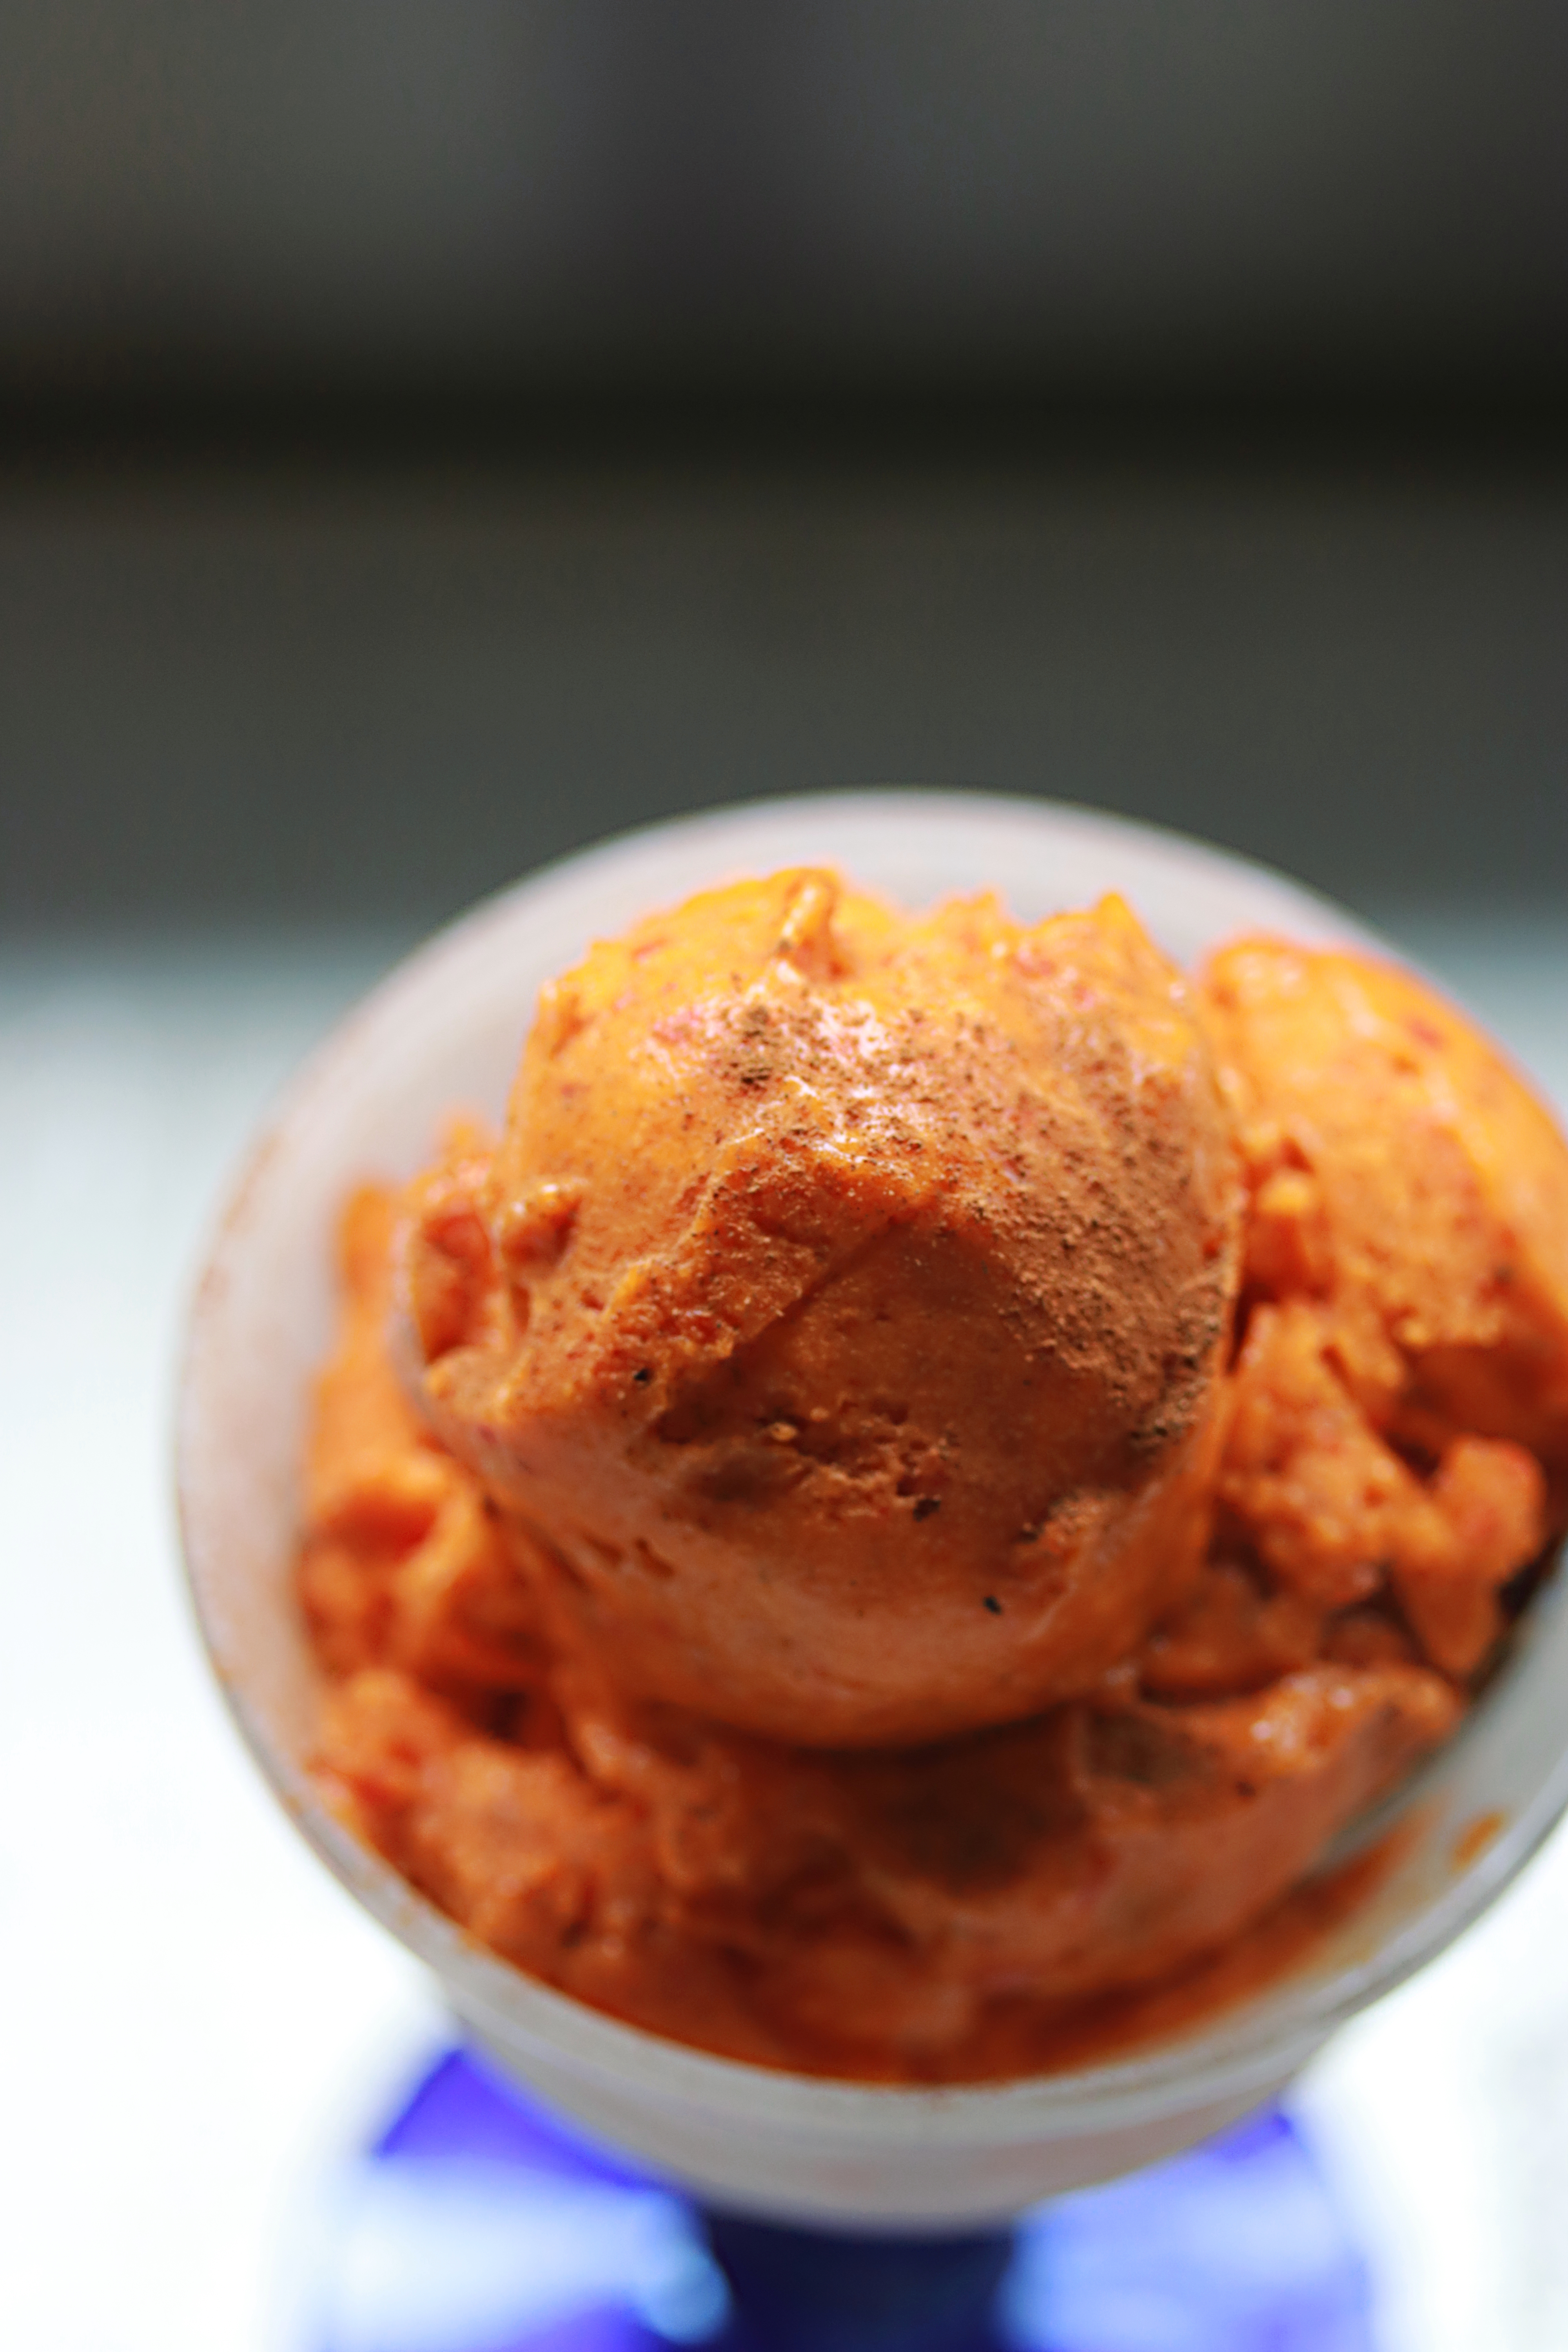 Three ingredient vegan sorbet with persimmons! This 100% guilt free vegan sorbet honestly tastes like pumpkin pie and doesn't have the extra calories!Three ingredient vegan sorbet! You'll never guess what gives this 100% guilt free vegan sorbet its vibrant orange color. It tastes like pumpkin pie, but there is no pumpkin in the recipe!